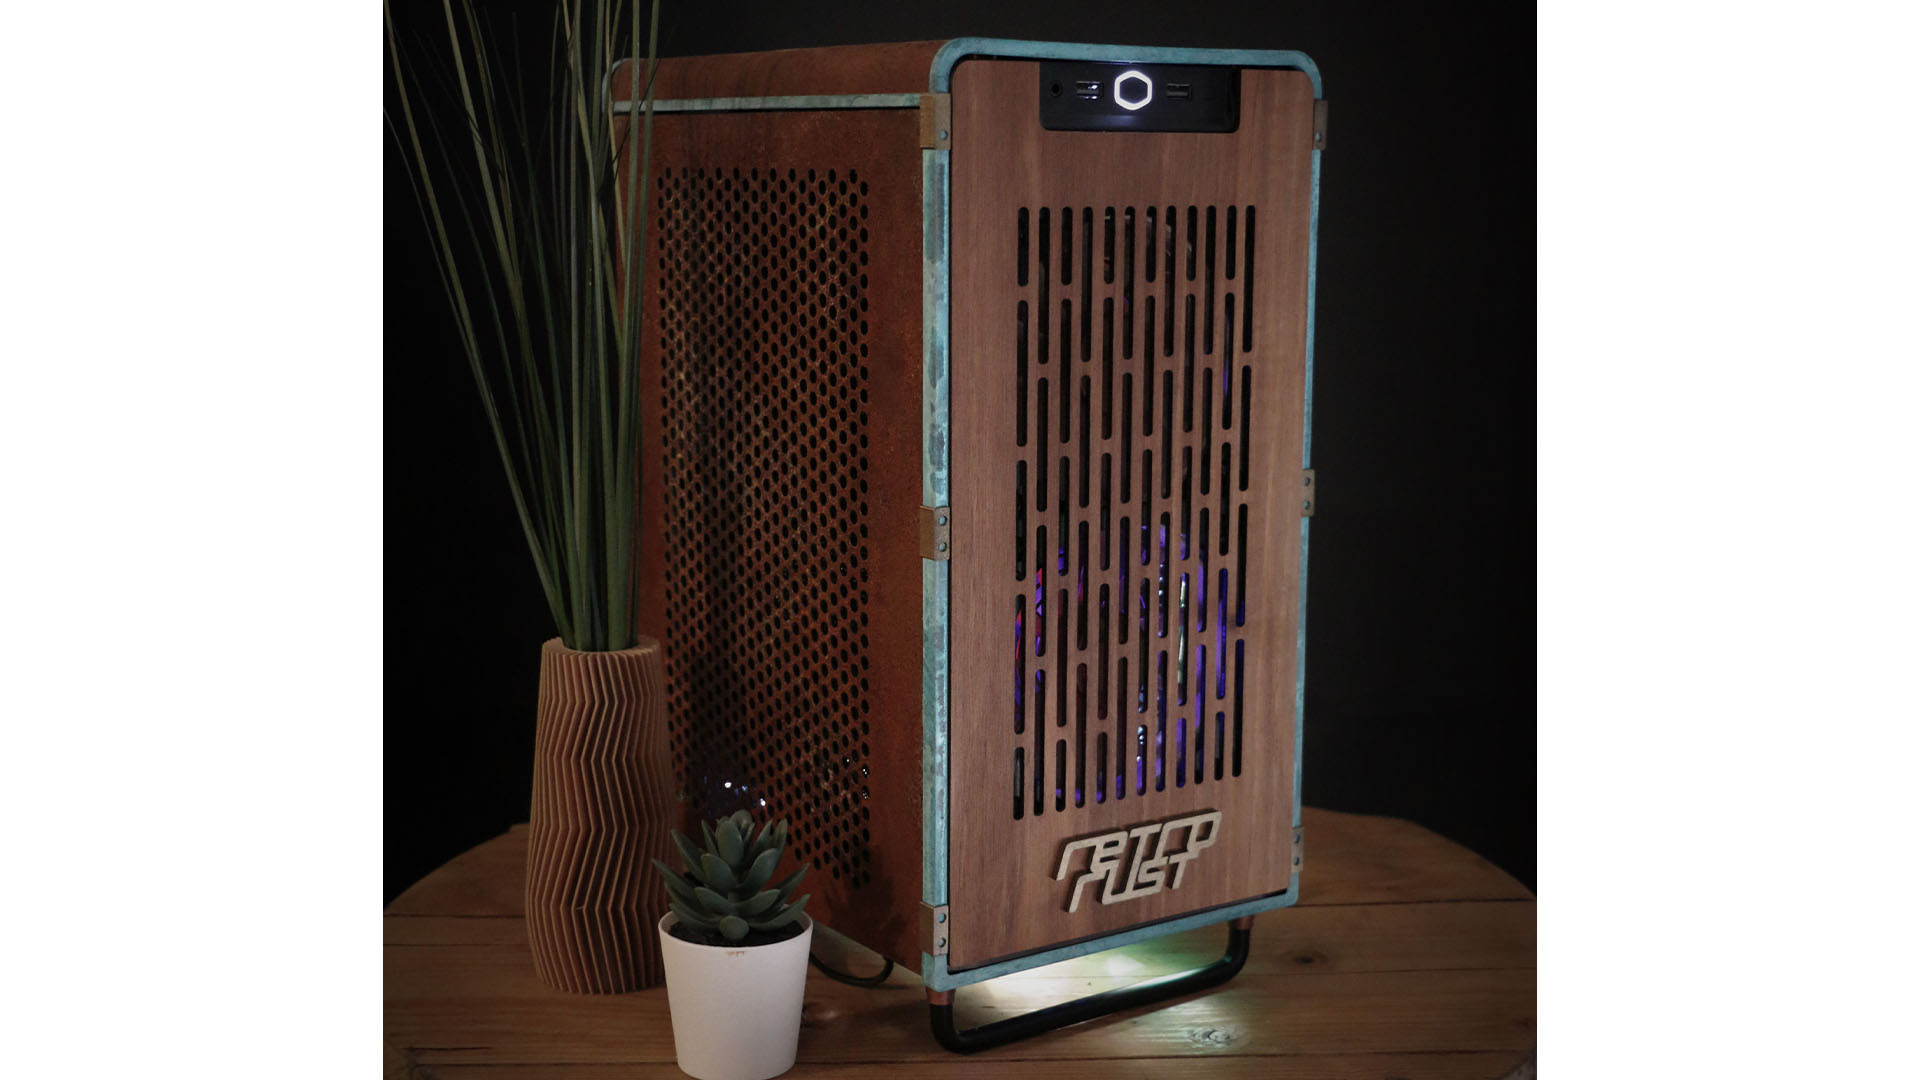 The mini ITX gaming PC with wooden panels and a leather top